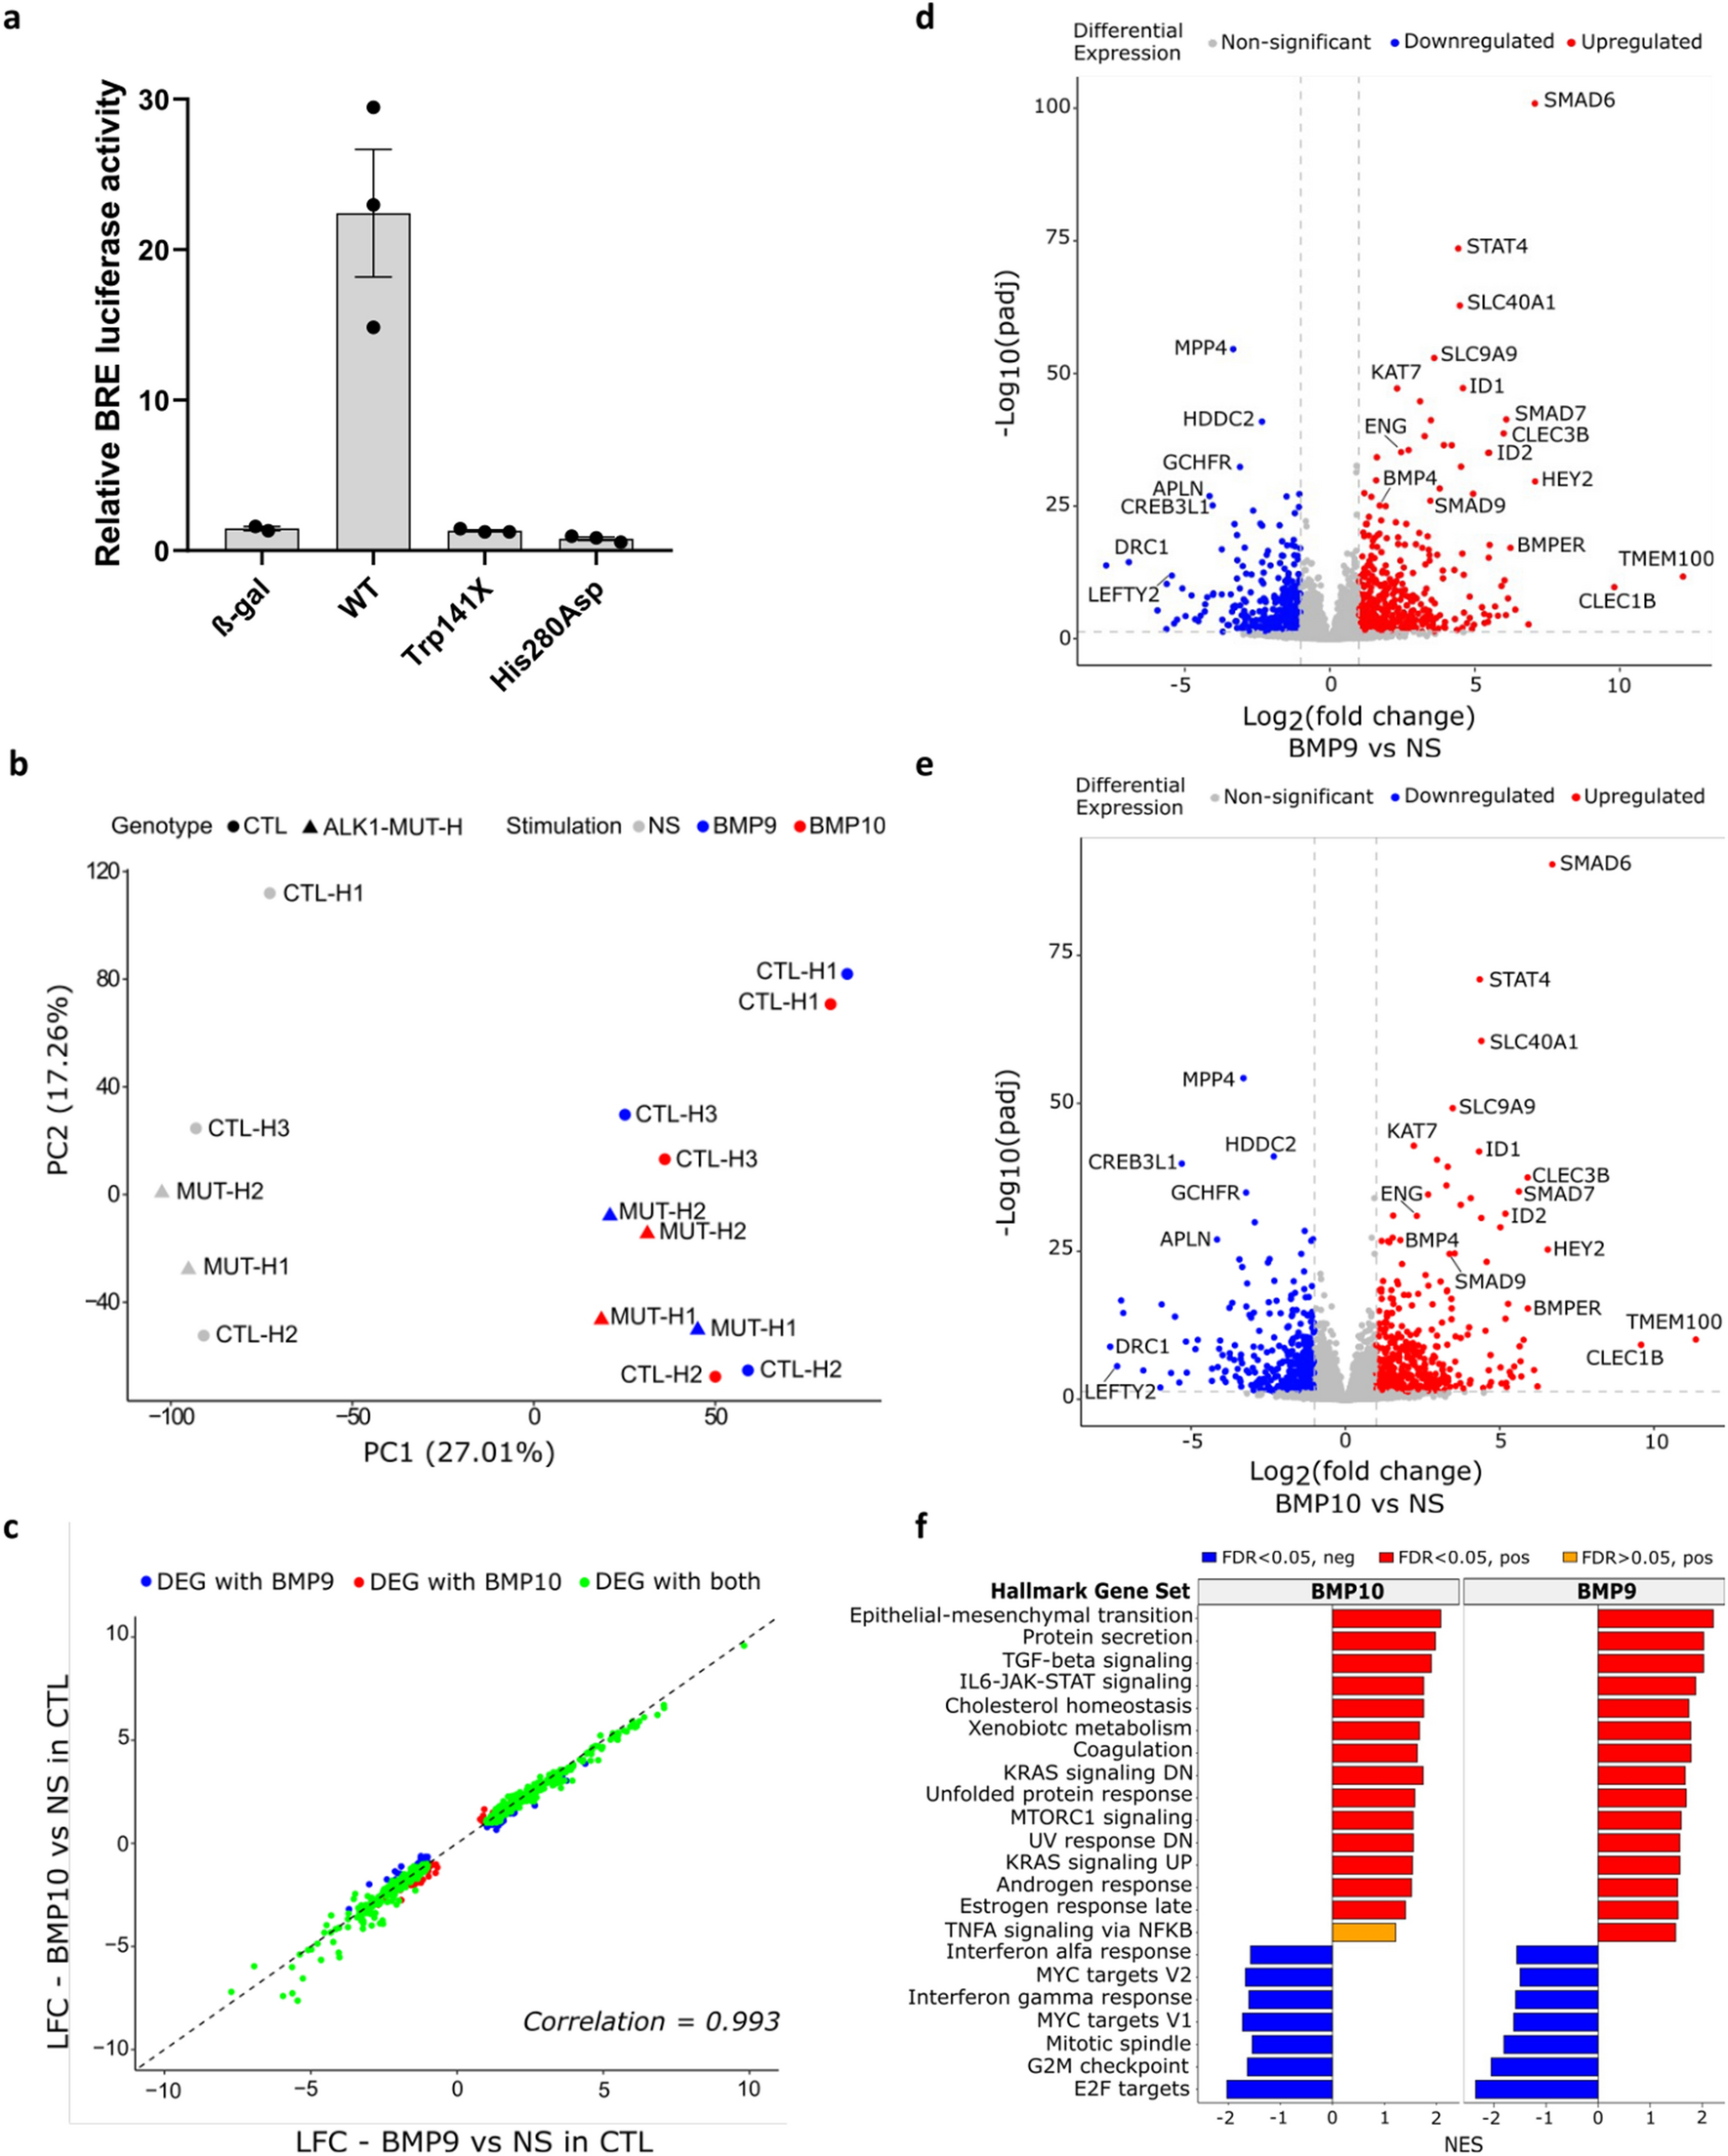 Impact of heterozygous ALK1 mutations on the transcriptomic response to BMP9 and BMP10 in endothelial cells from hereditary hemorrhagic telangiectasia and pulmonary arterial hypertension donors